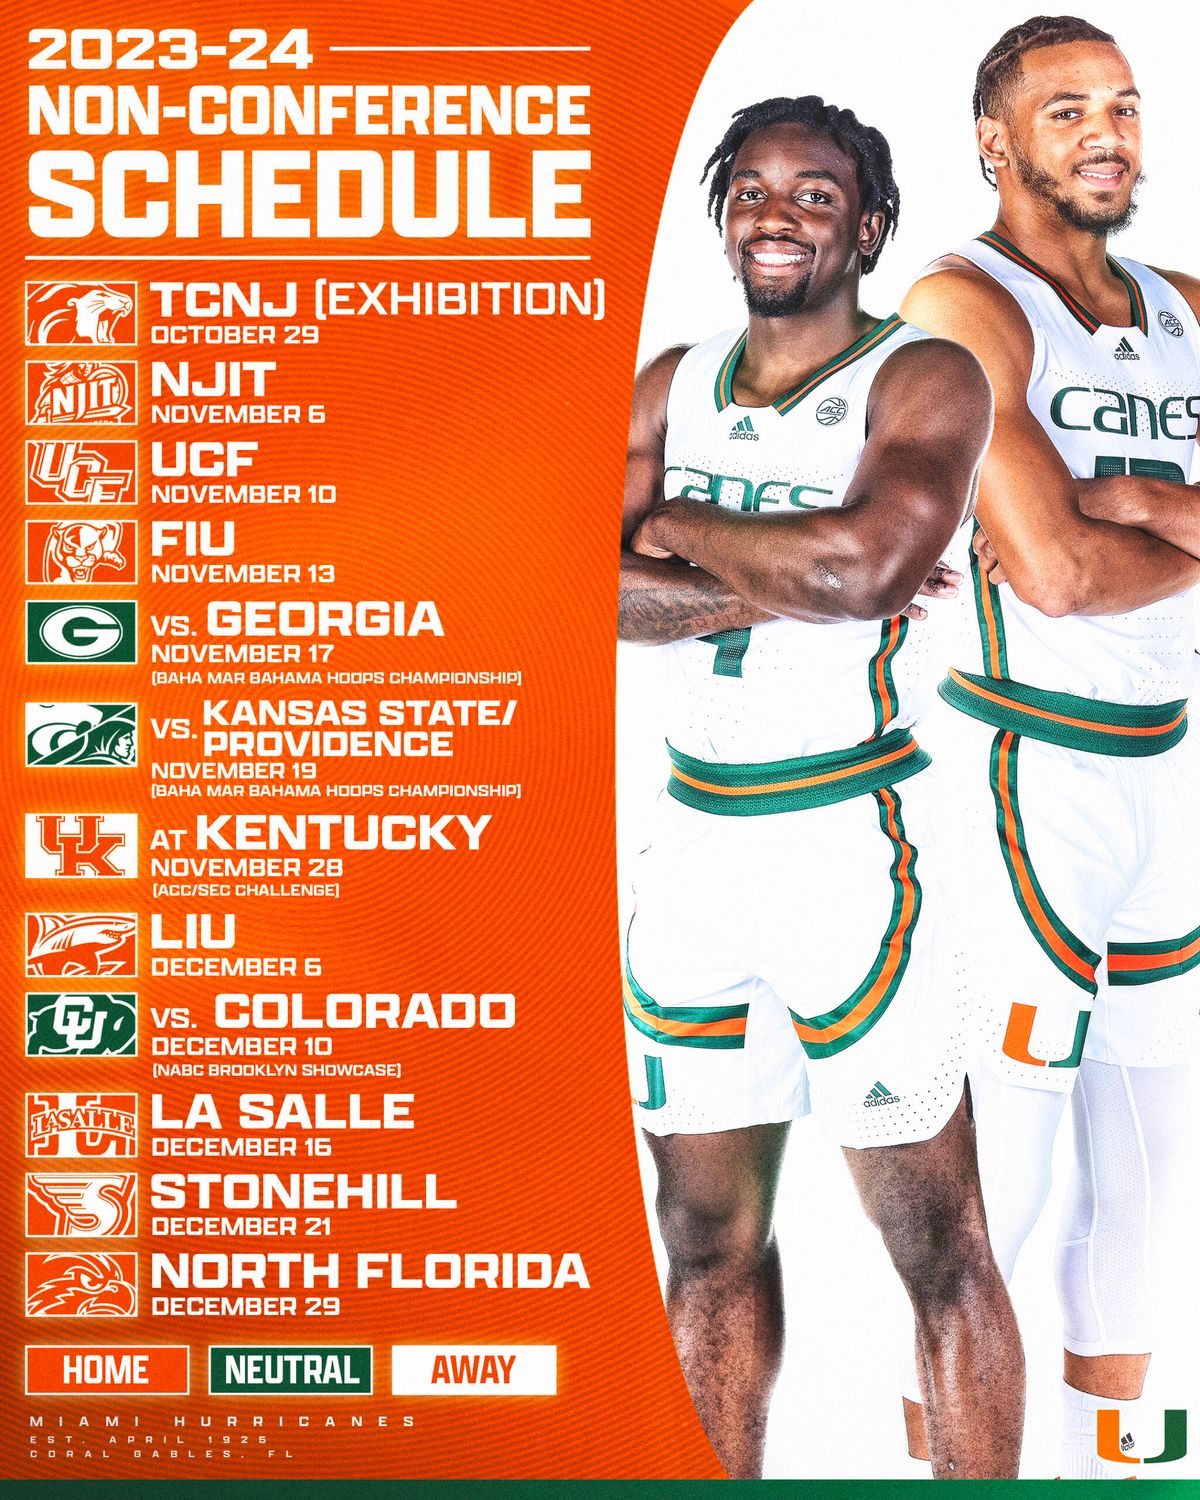 Hurricanes announce 2023-24 regular season schedule - Canes Country